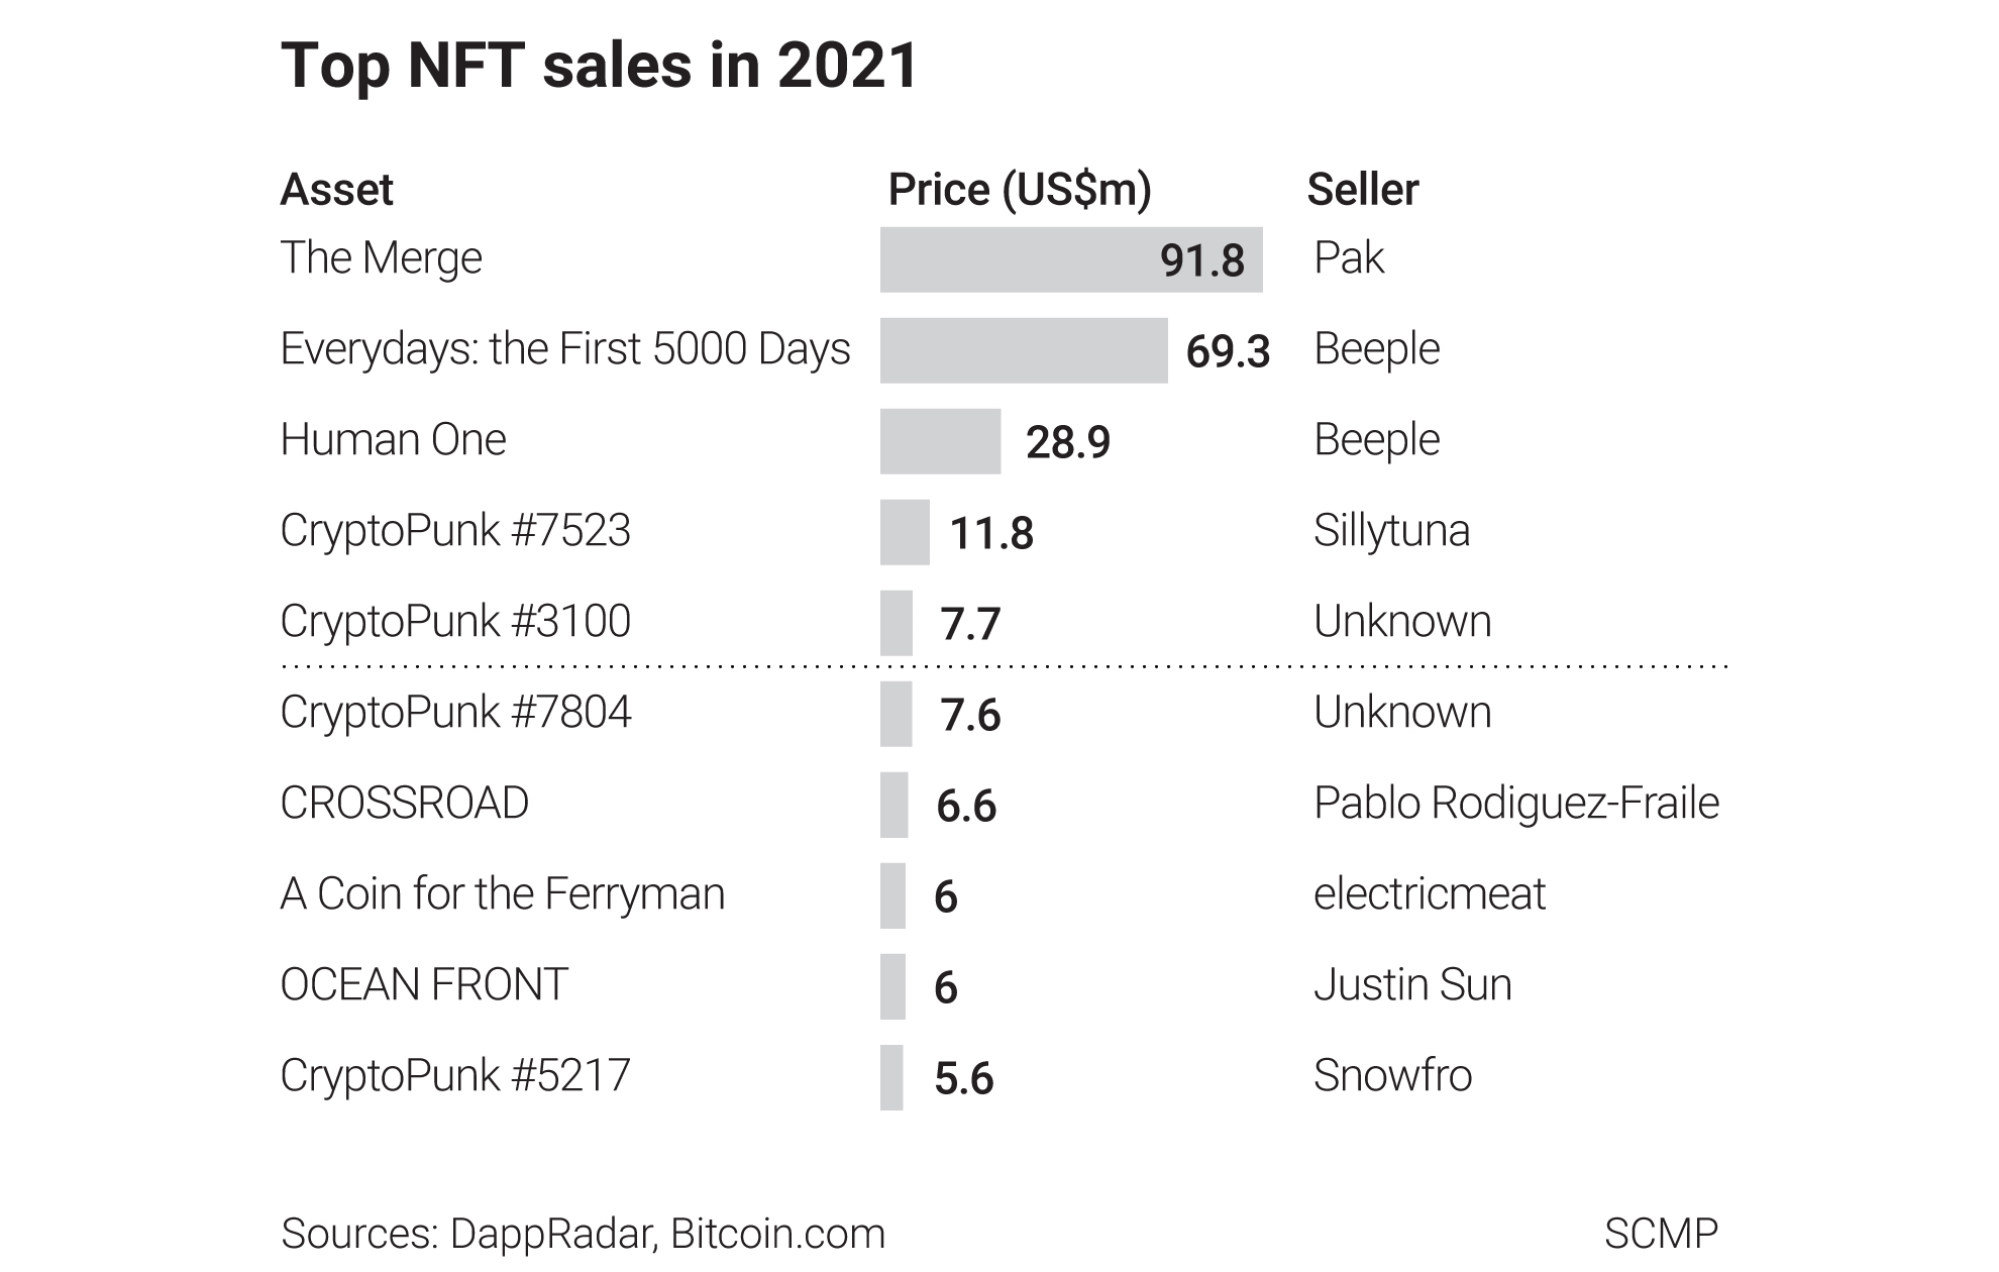 The global market for NFTs generated sales of more than US$40 billion in 2021, according to blockchain data platform Chainalysis.